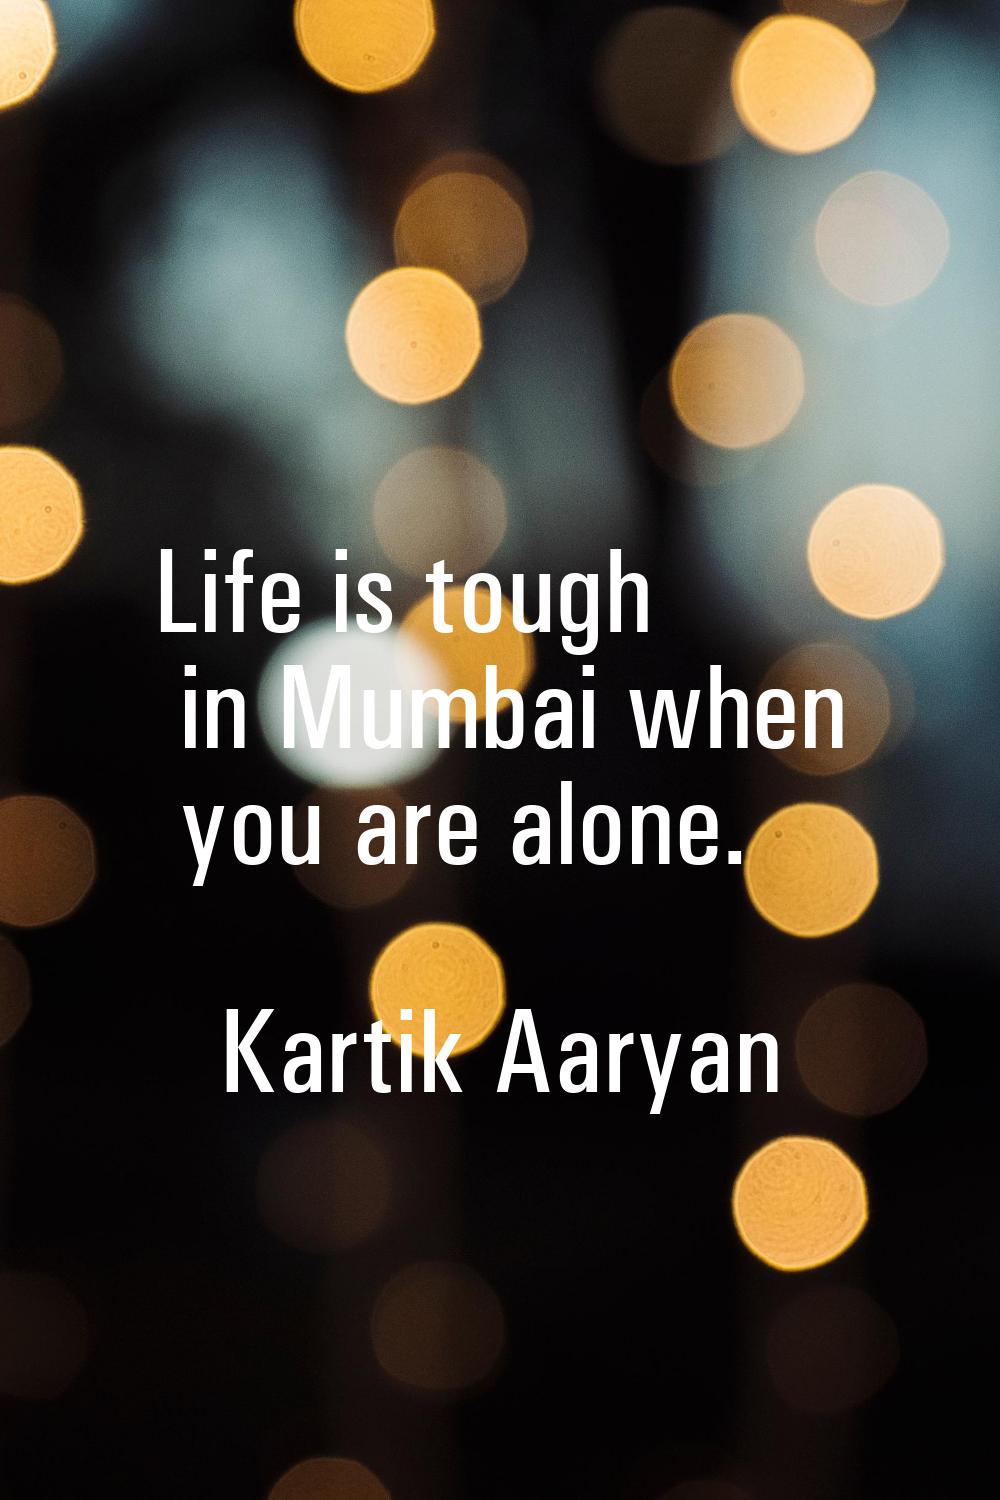 Life is tough in Mumbai when you are alone.